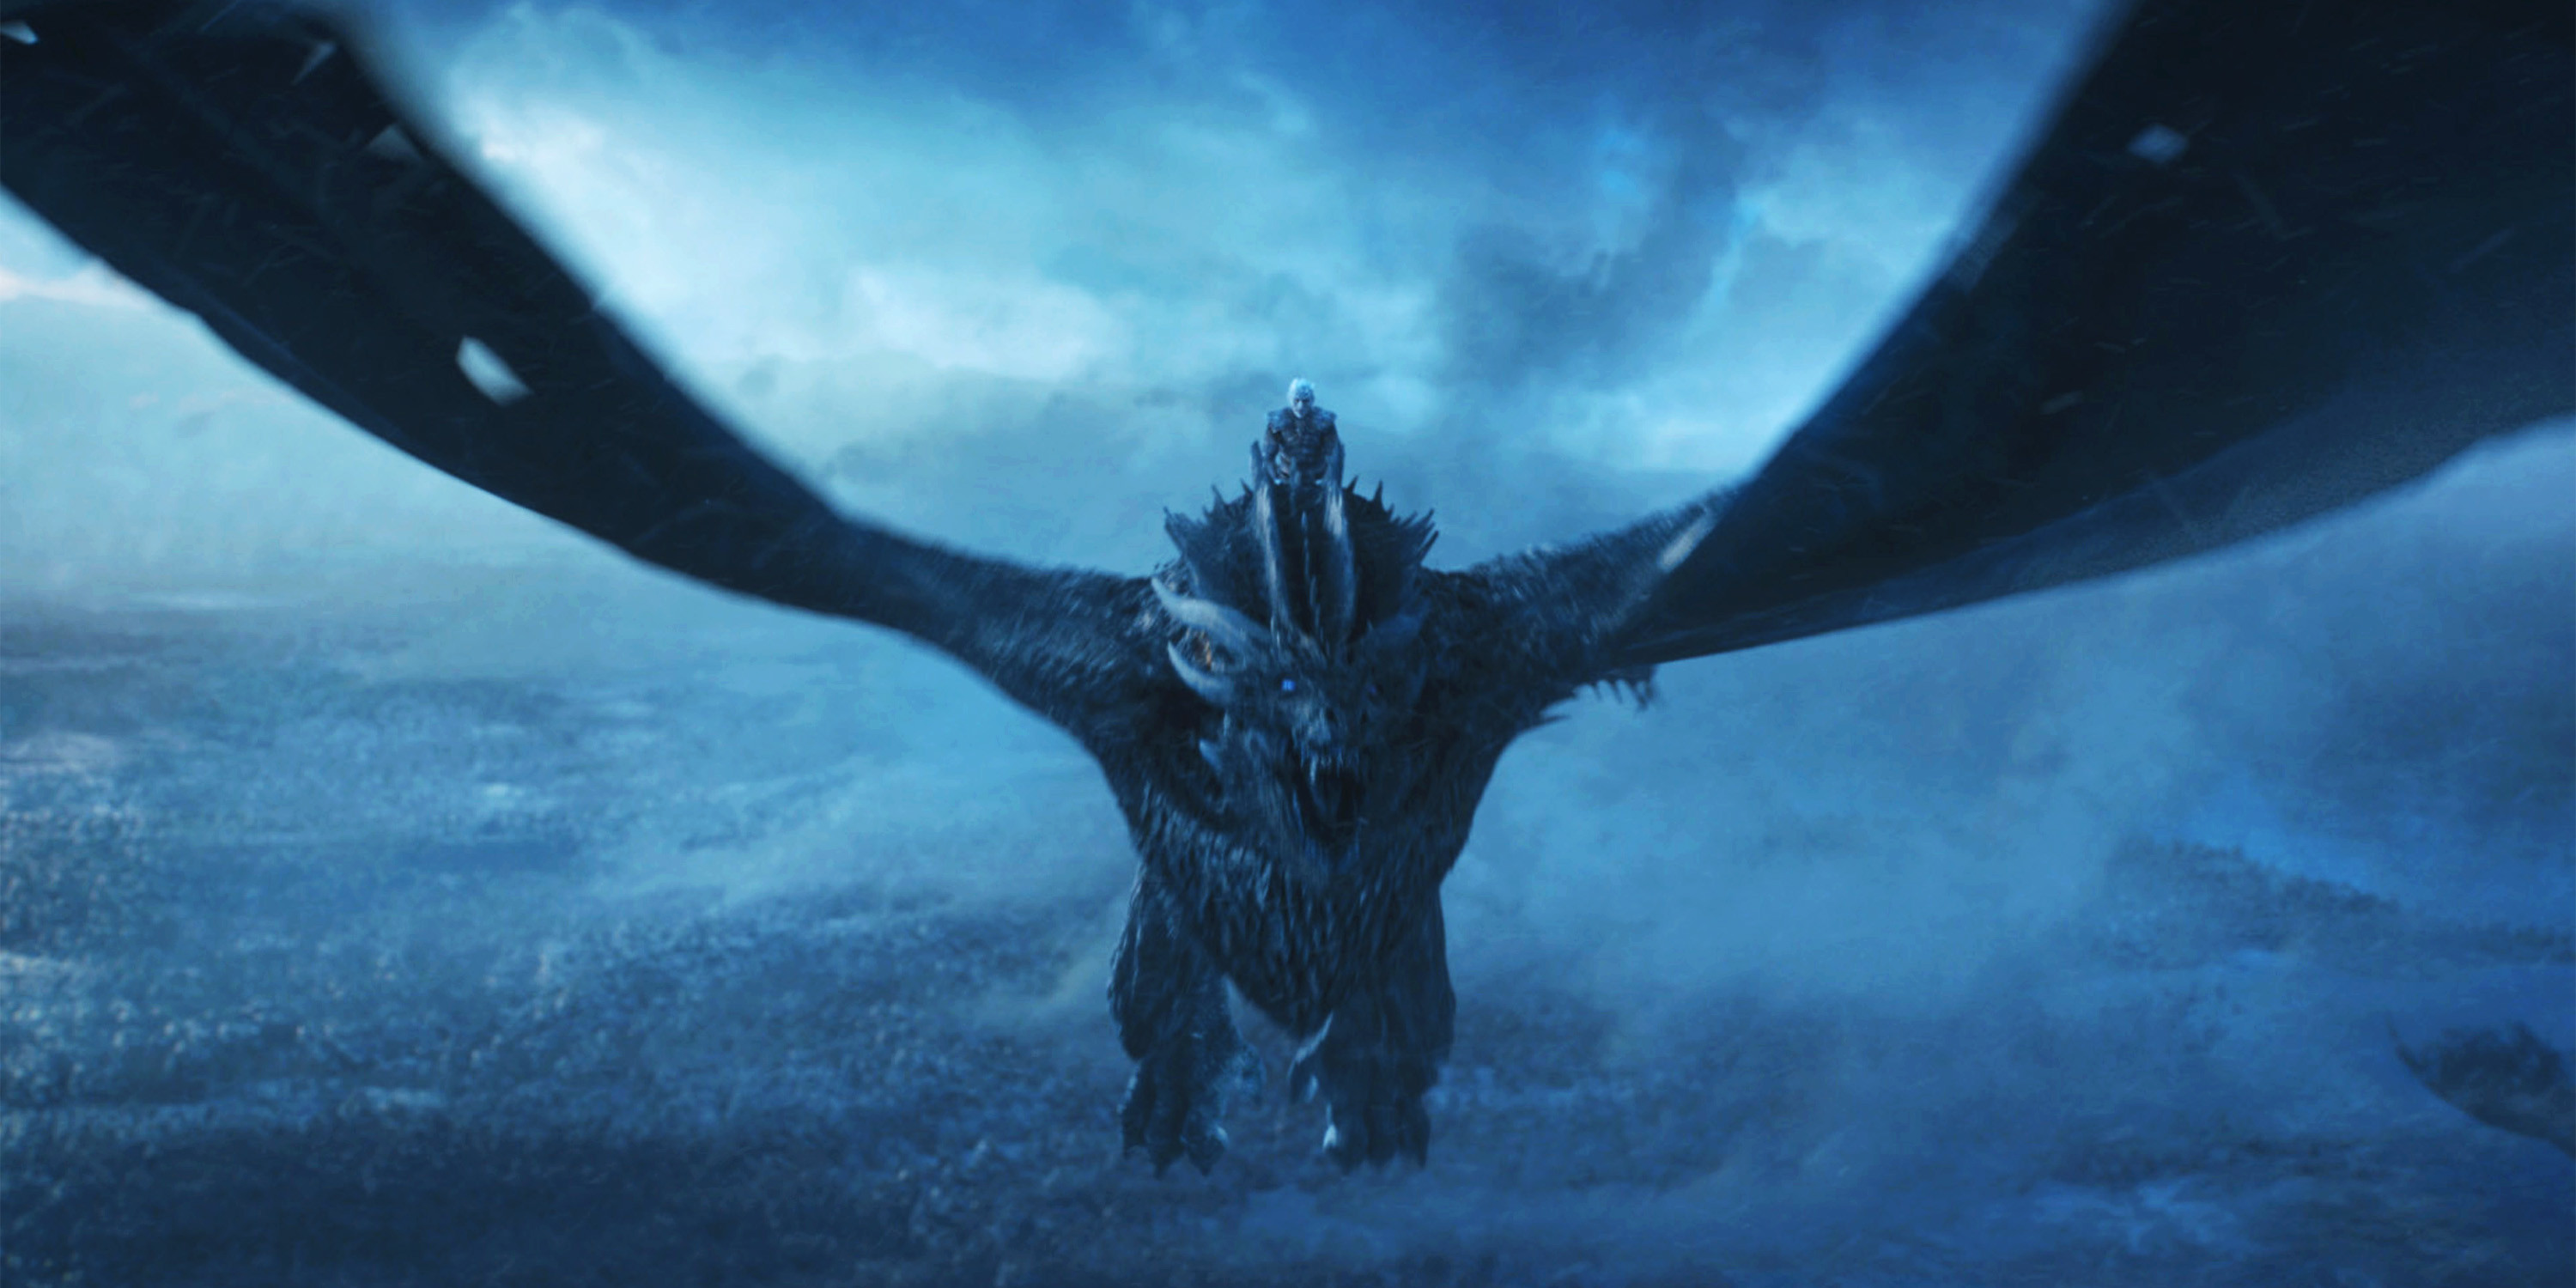 3000x1500 Is Viserion an Ice Dragon on 'Game of Thrones?' - The Night King's Dragon  GoT